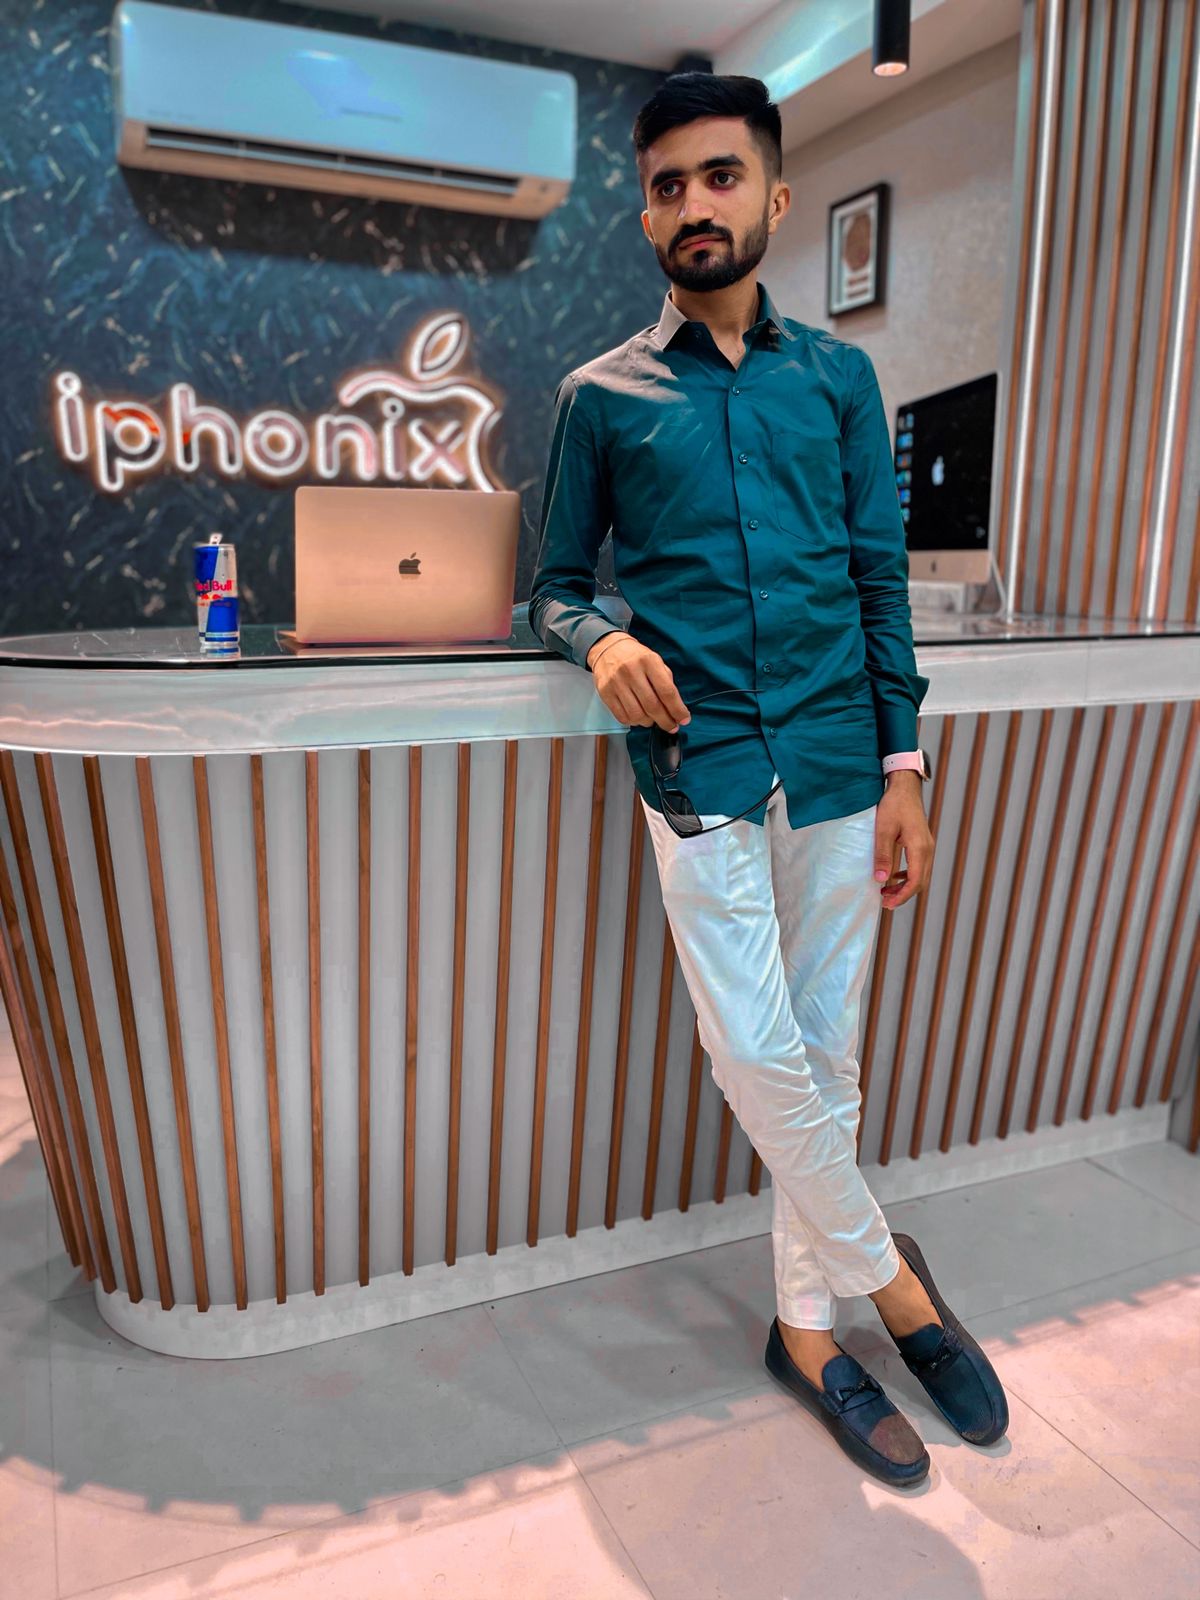 Owner of iPhonix mobile Abhishek Balsara offers iPhones at the best rates